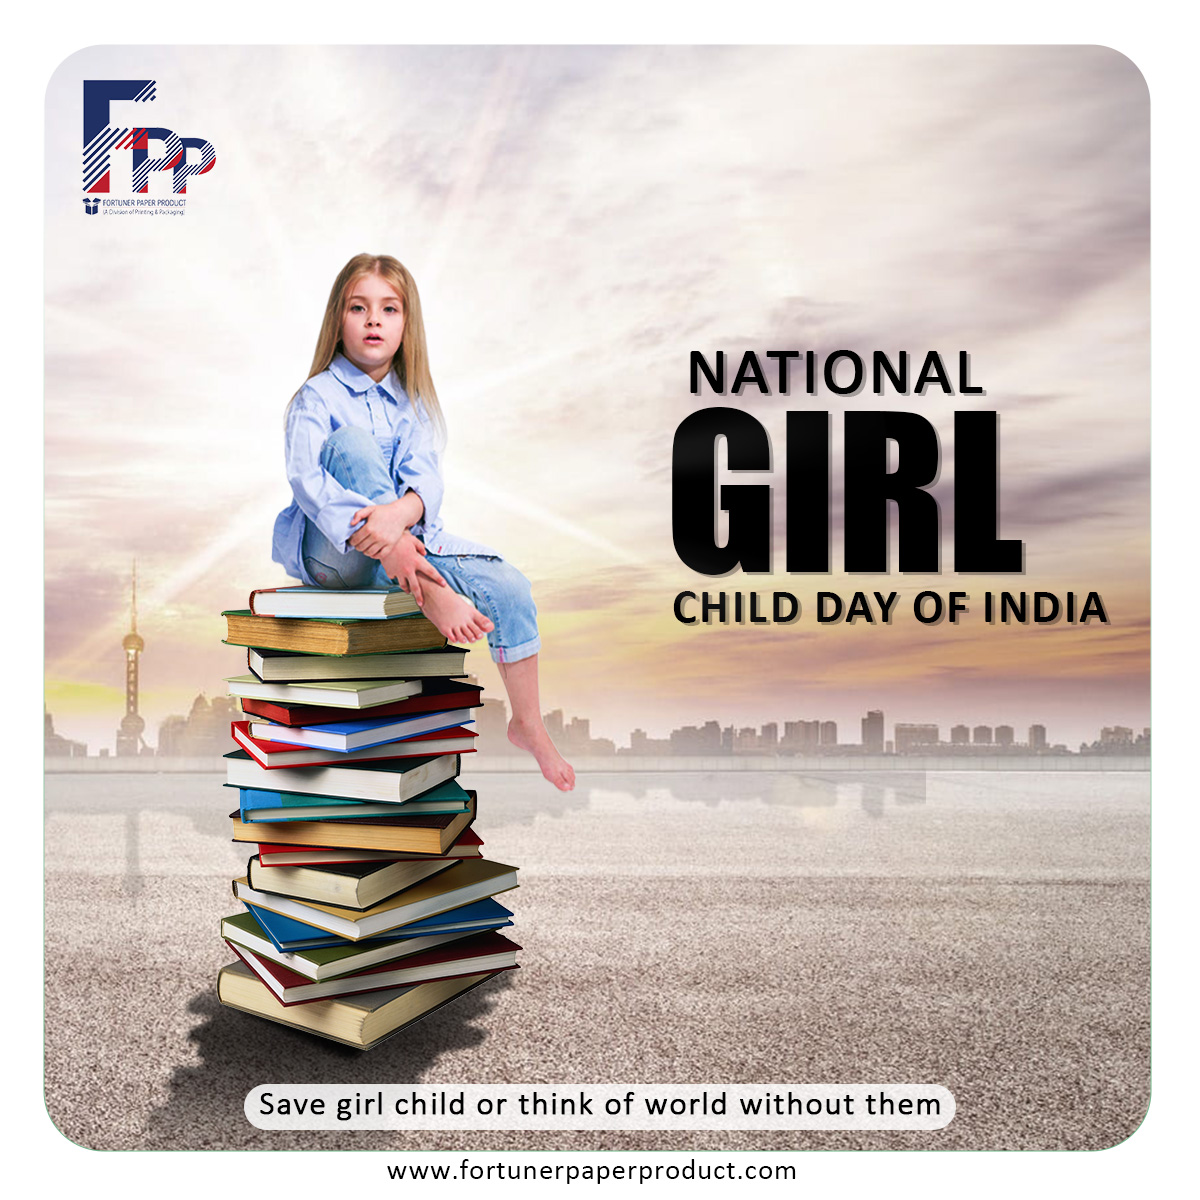 Smiling face of each and every young girl is the mark of God's quality. We wish you a Happy National Girl Child Day.
.
.
#fortunerpaperproduct #girlchild #girlchilday2023 #womenempowerment #educategirlchild #daughter #girlchildeducation #babygirlchild #savegirl  #equality